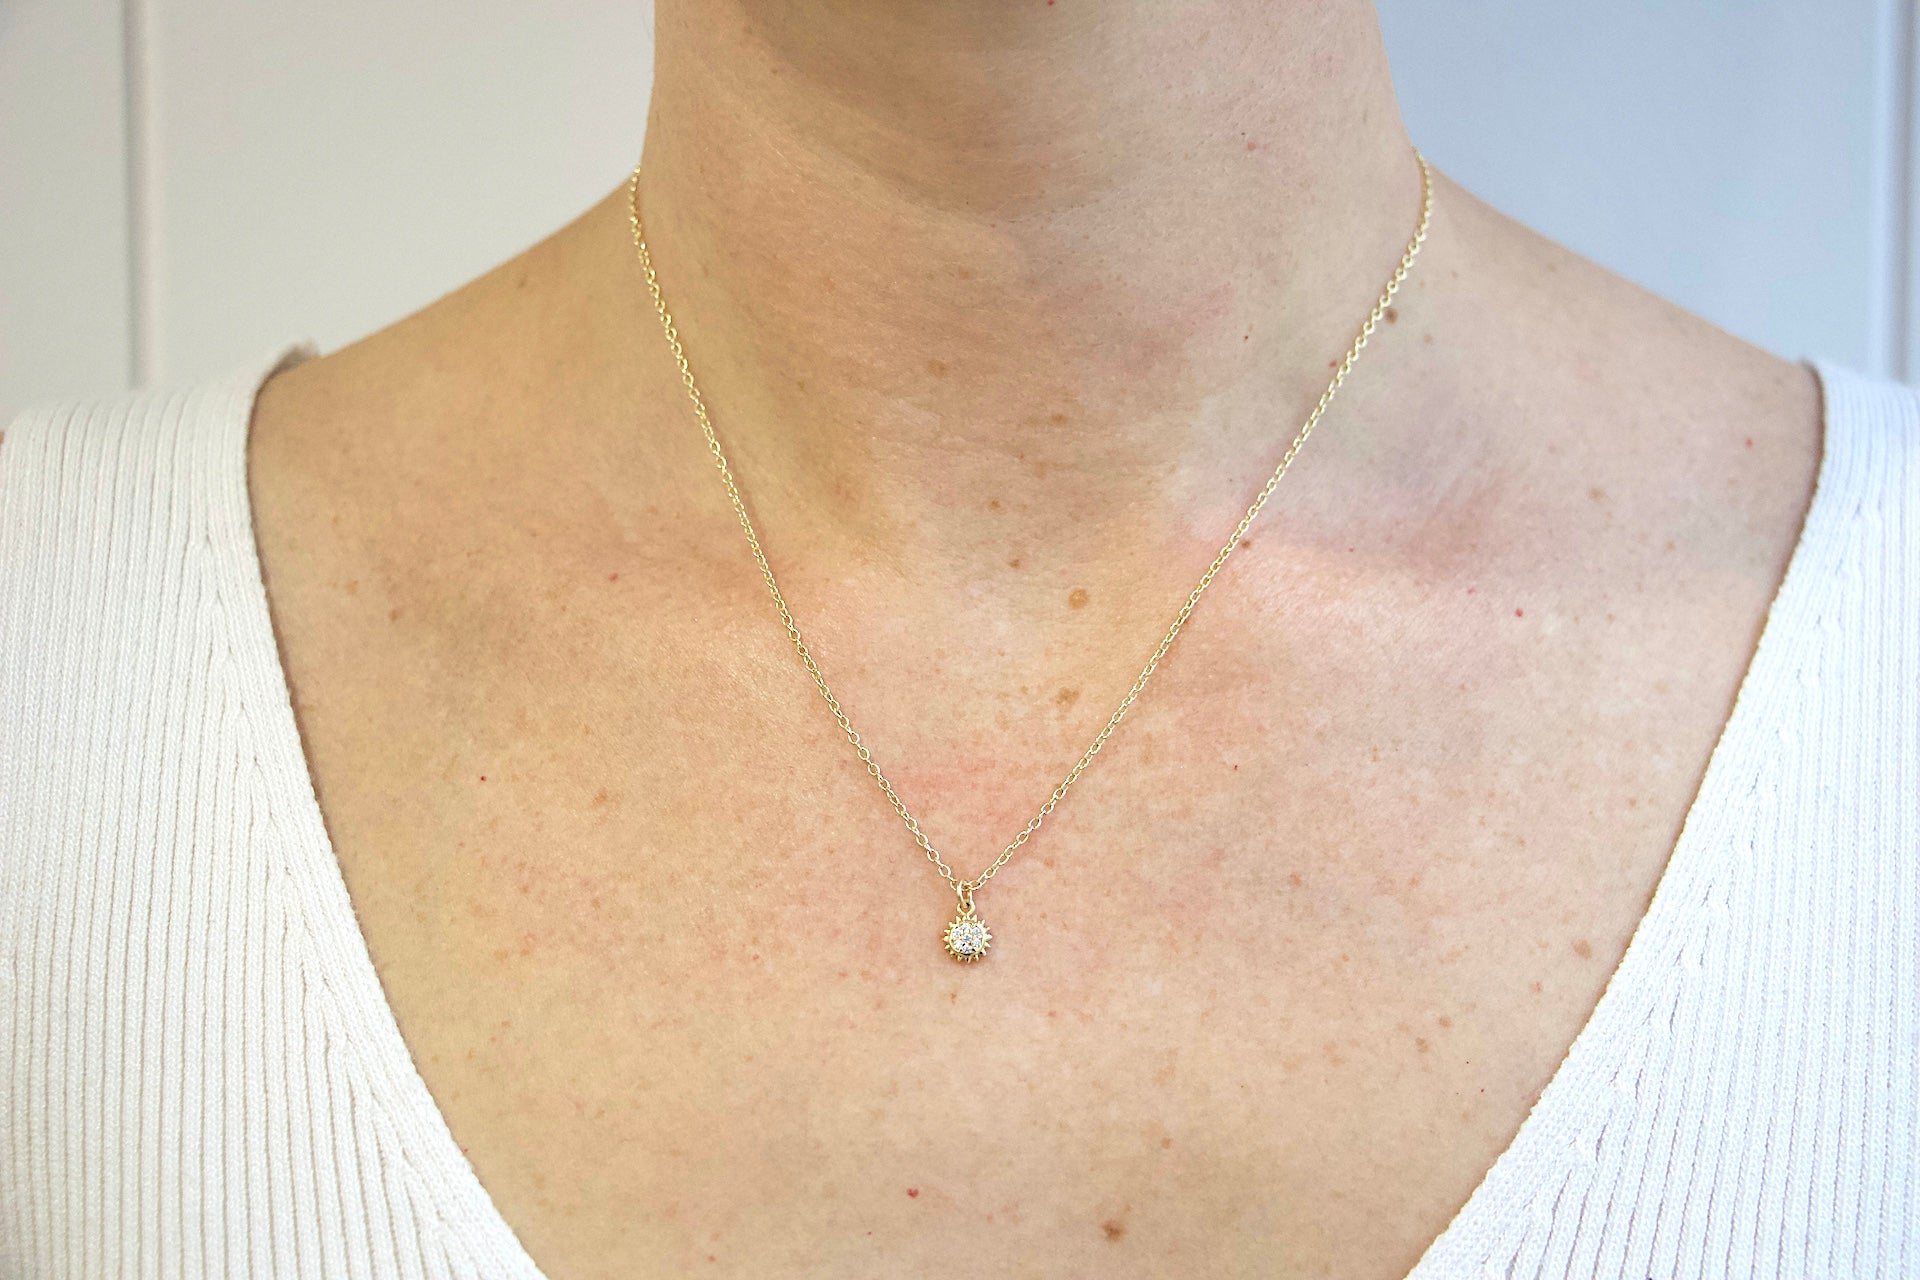 Model wearing AW Boutique's gold filled 16 inch dainty necklace with a mini Sun charm pendant. This option shows the 16-18 inch extendable length option, worn at 18 inches length in this image.  Part of Celestial collection. Gold filled jewellery. 